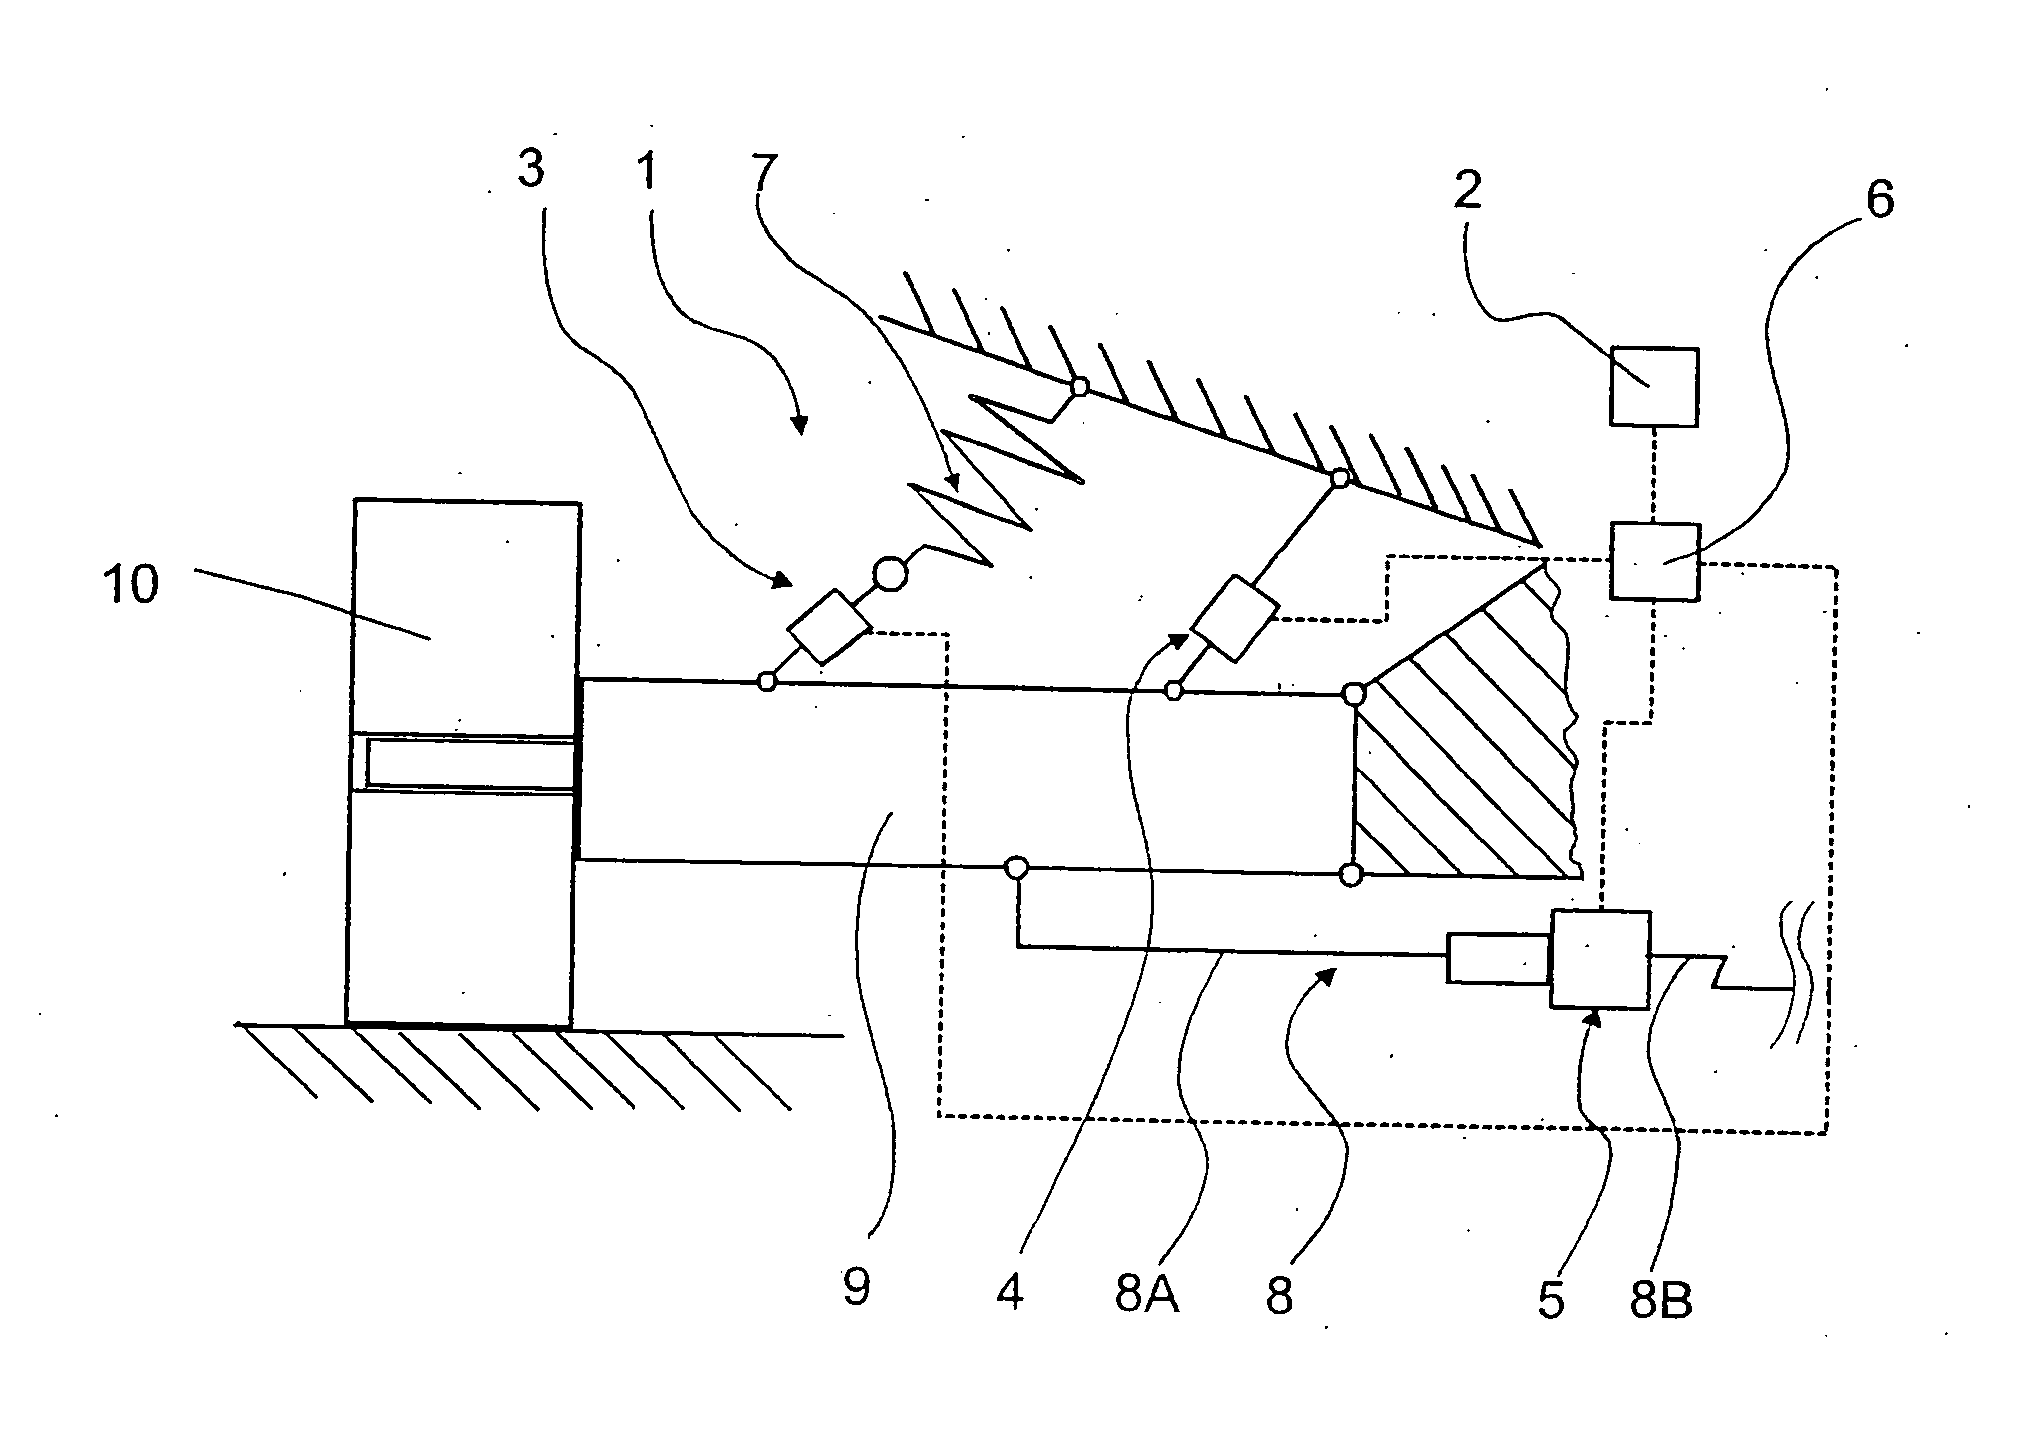 Process For Controlling And Regulating An Active Chasis System